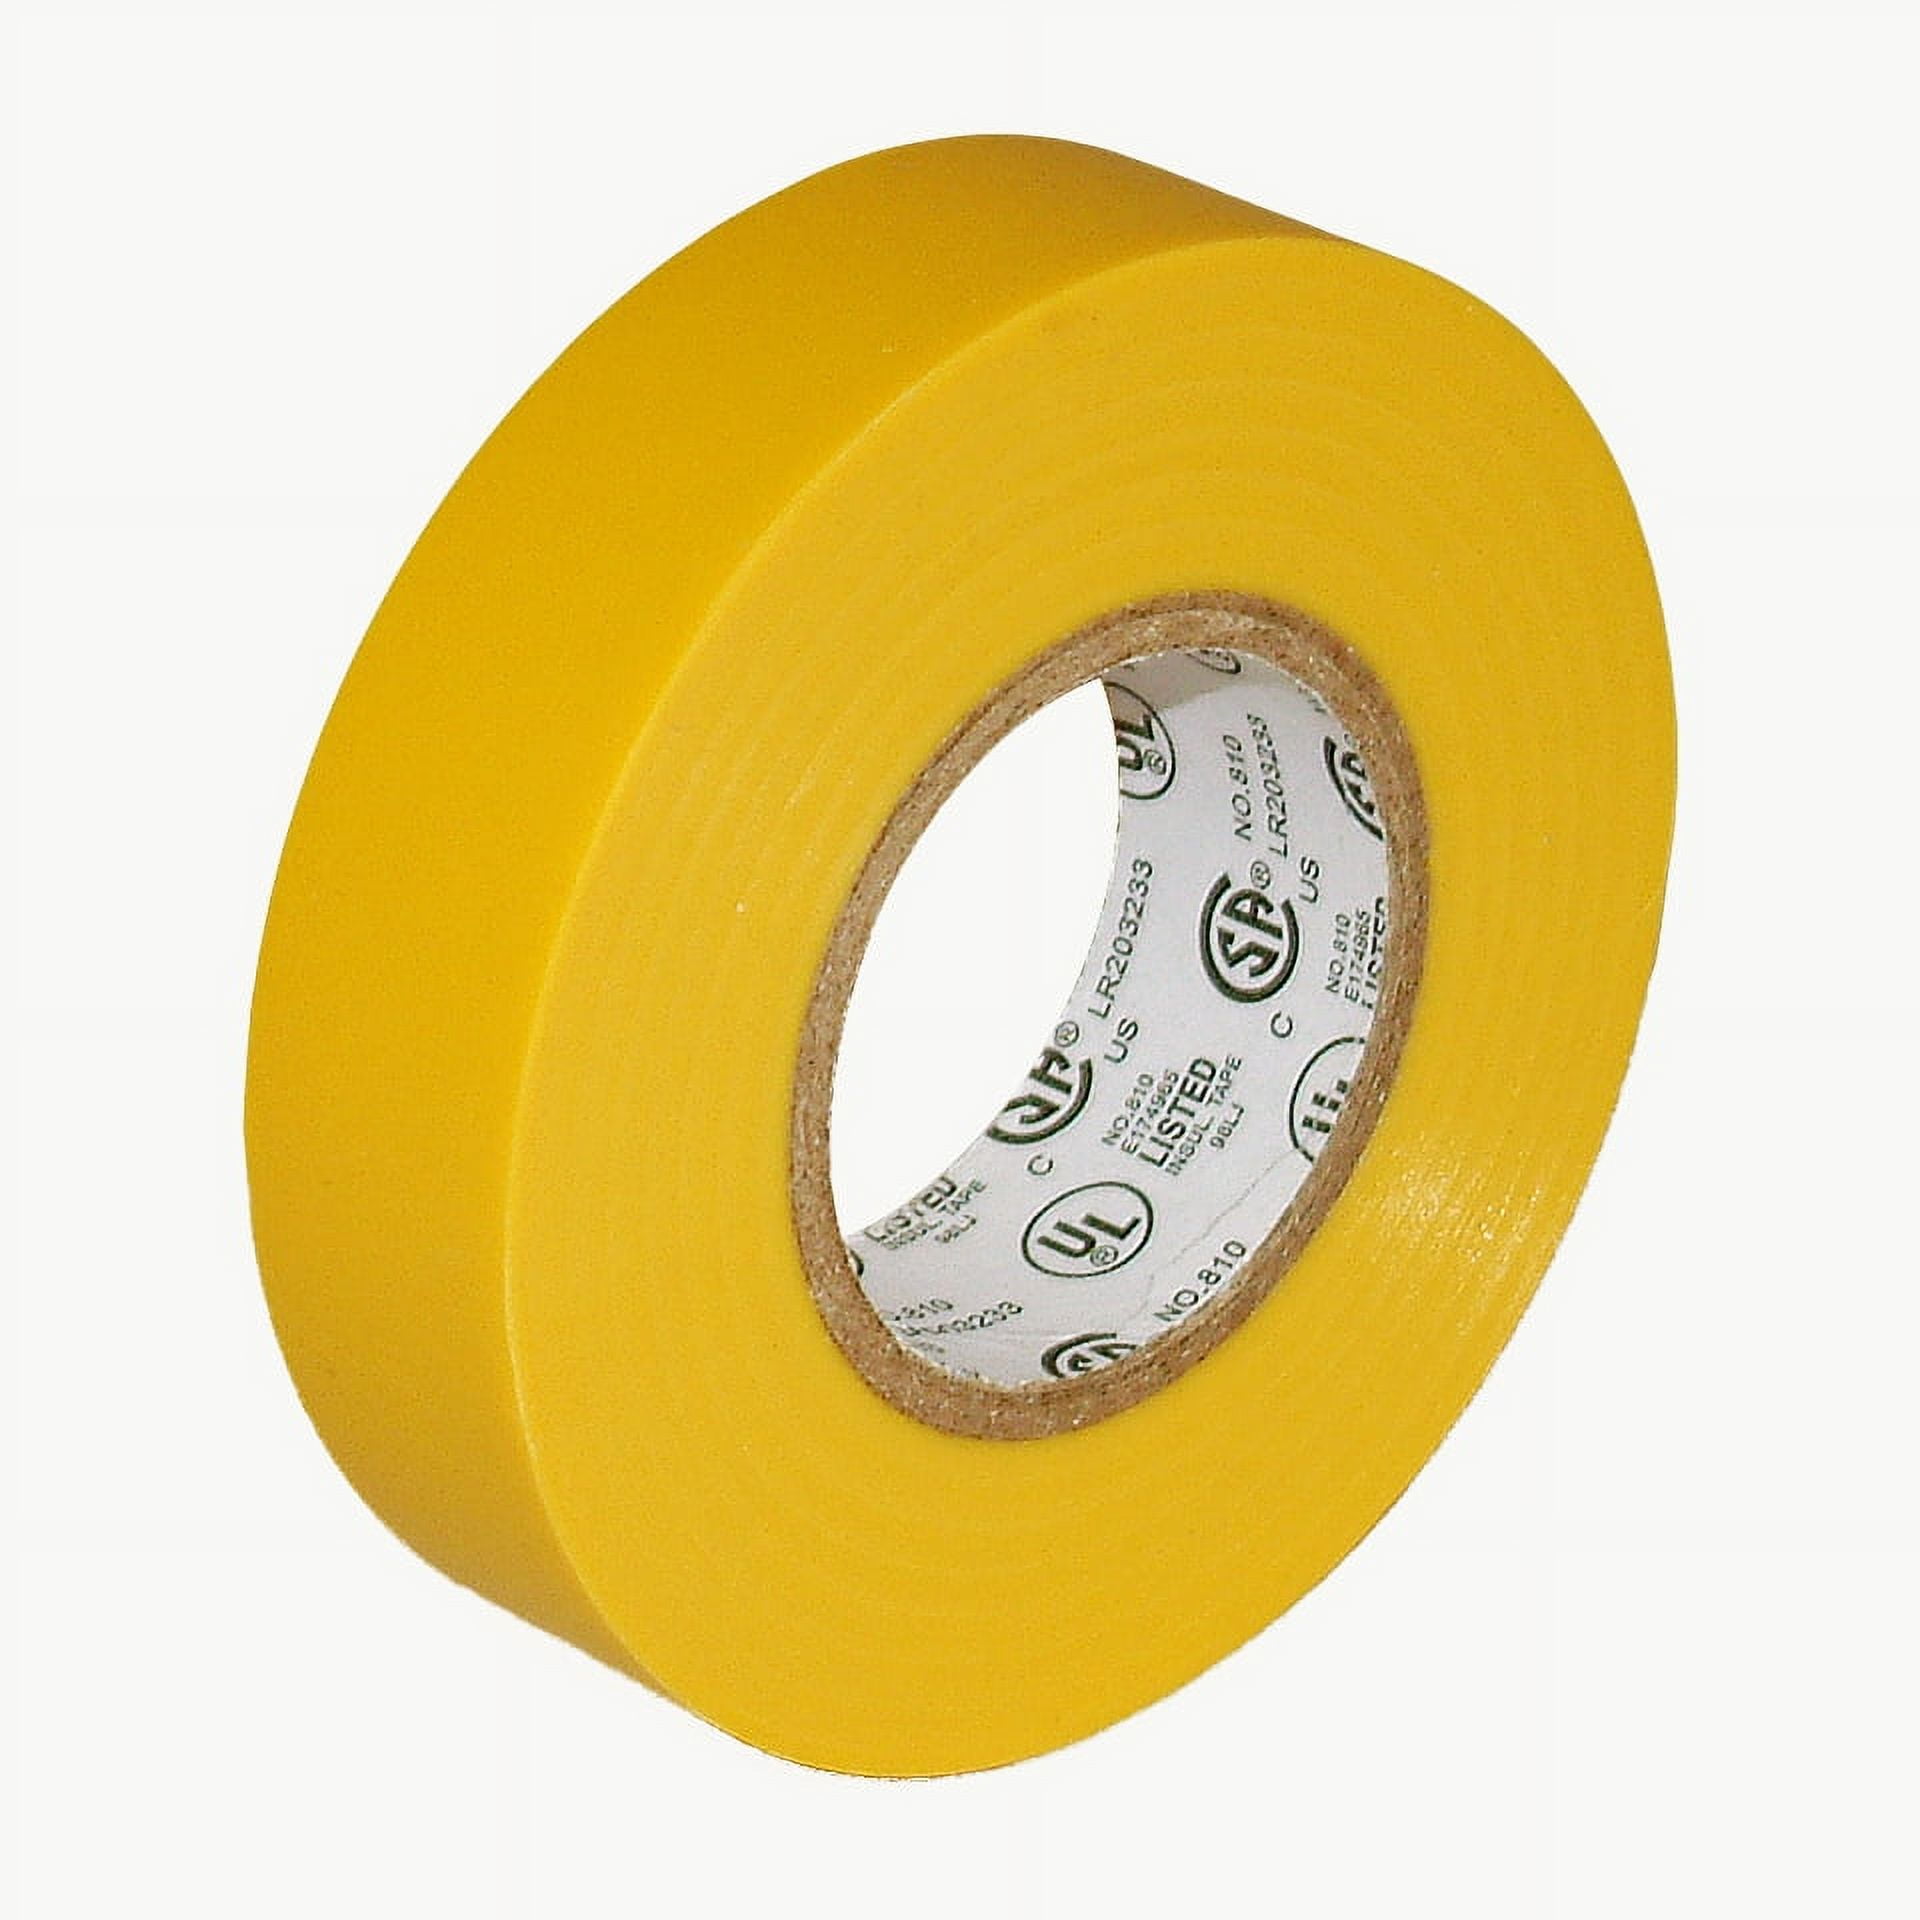 JVCC E-Tape Colored Electrical Tape [7 mils thick]: 3/4 in. x 66 ft.  (Yellow) 